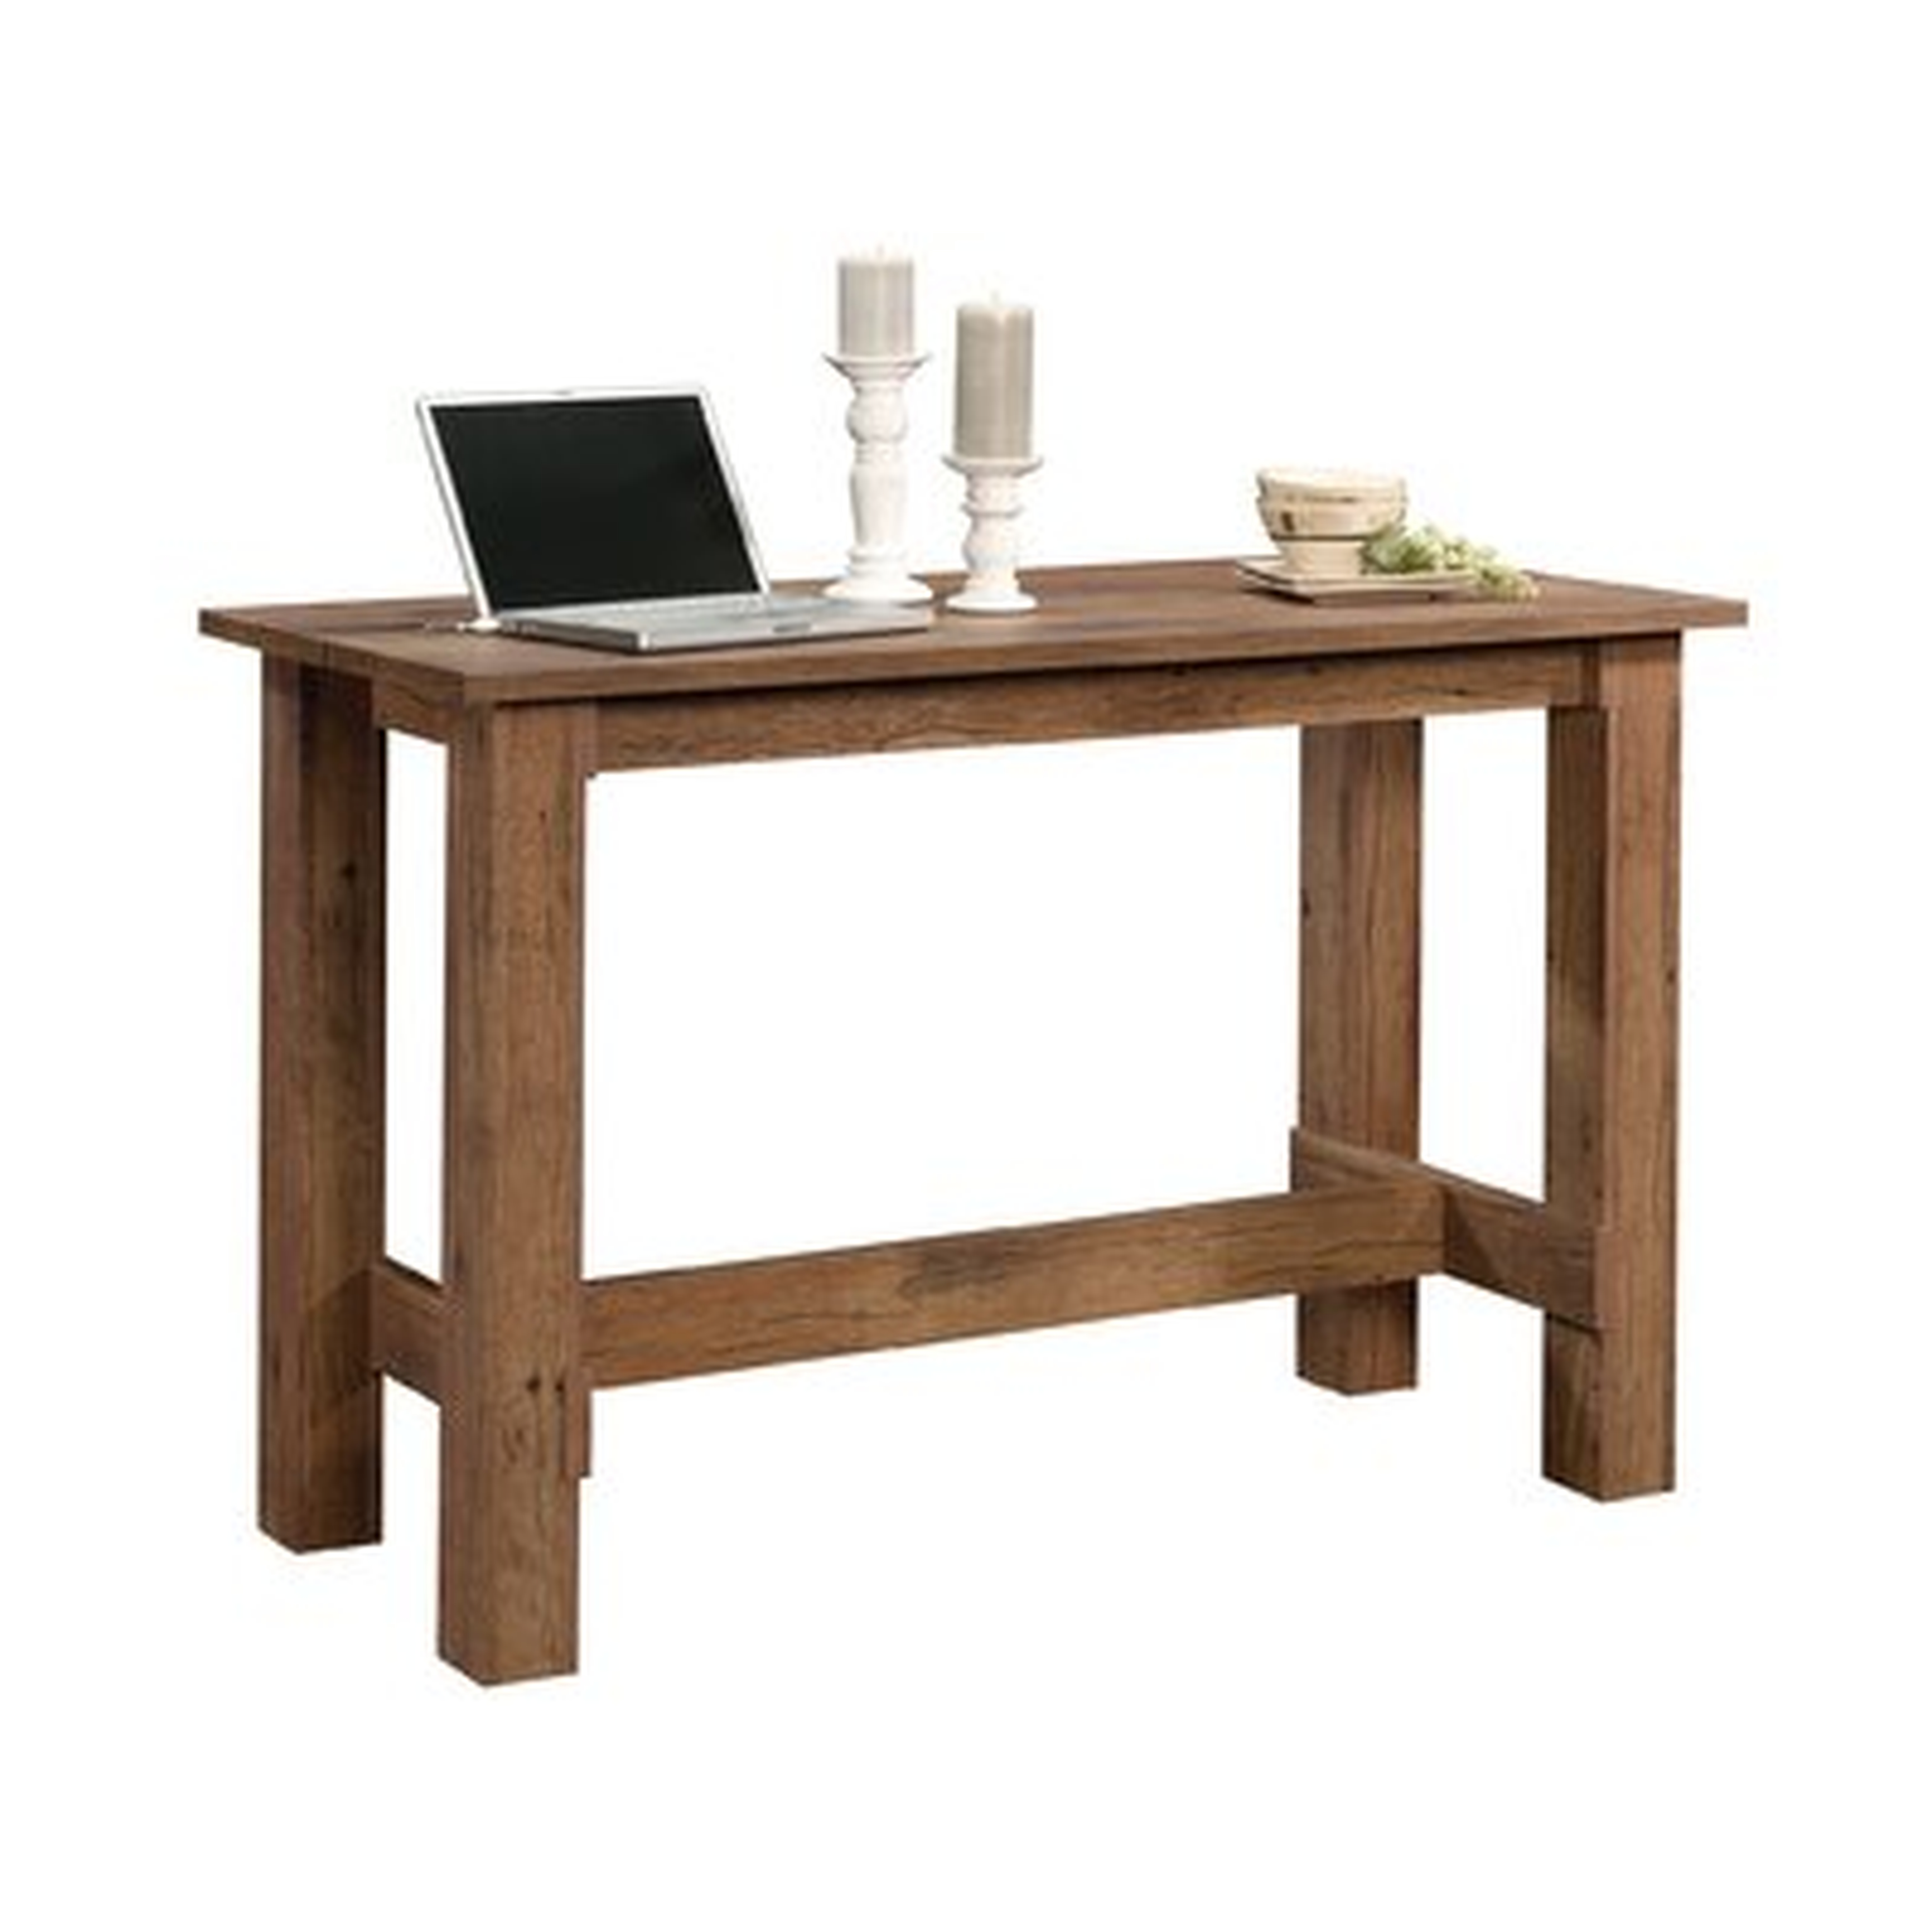 Maloy Counter Height Dining Table - Wayfair